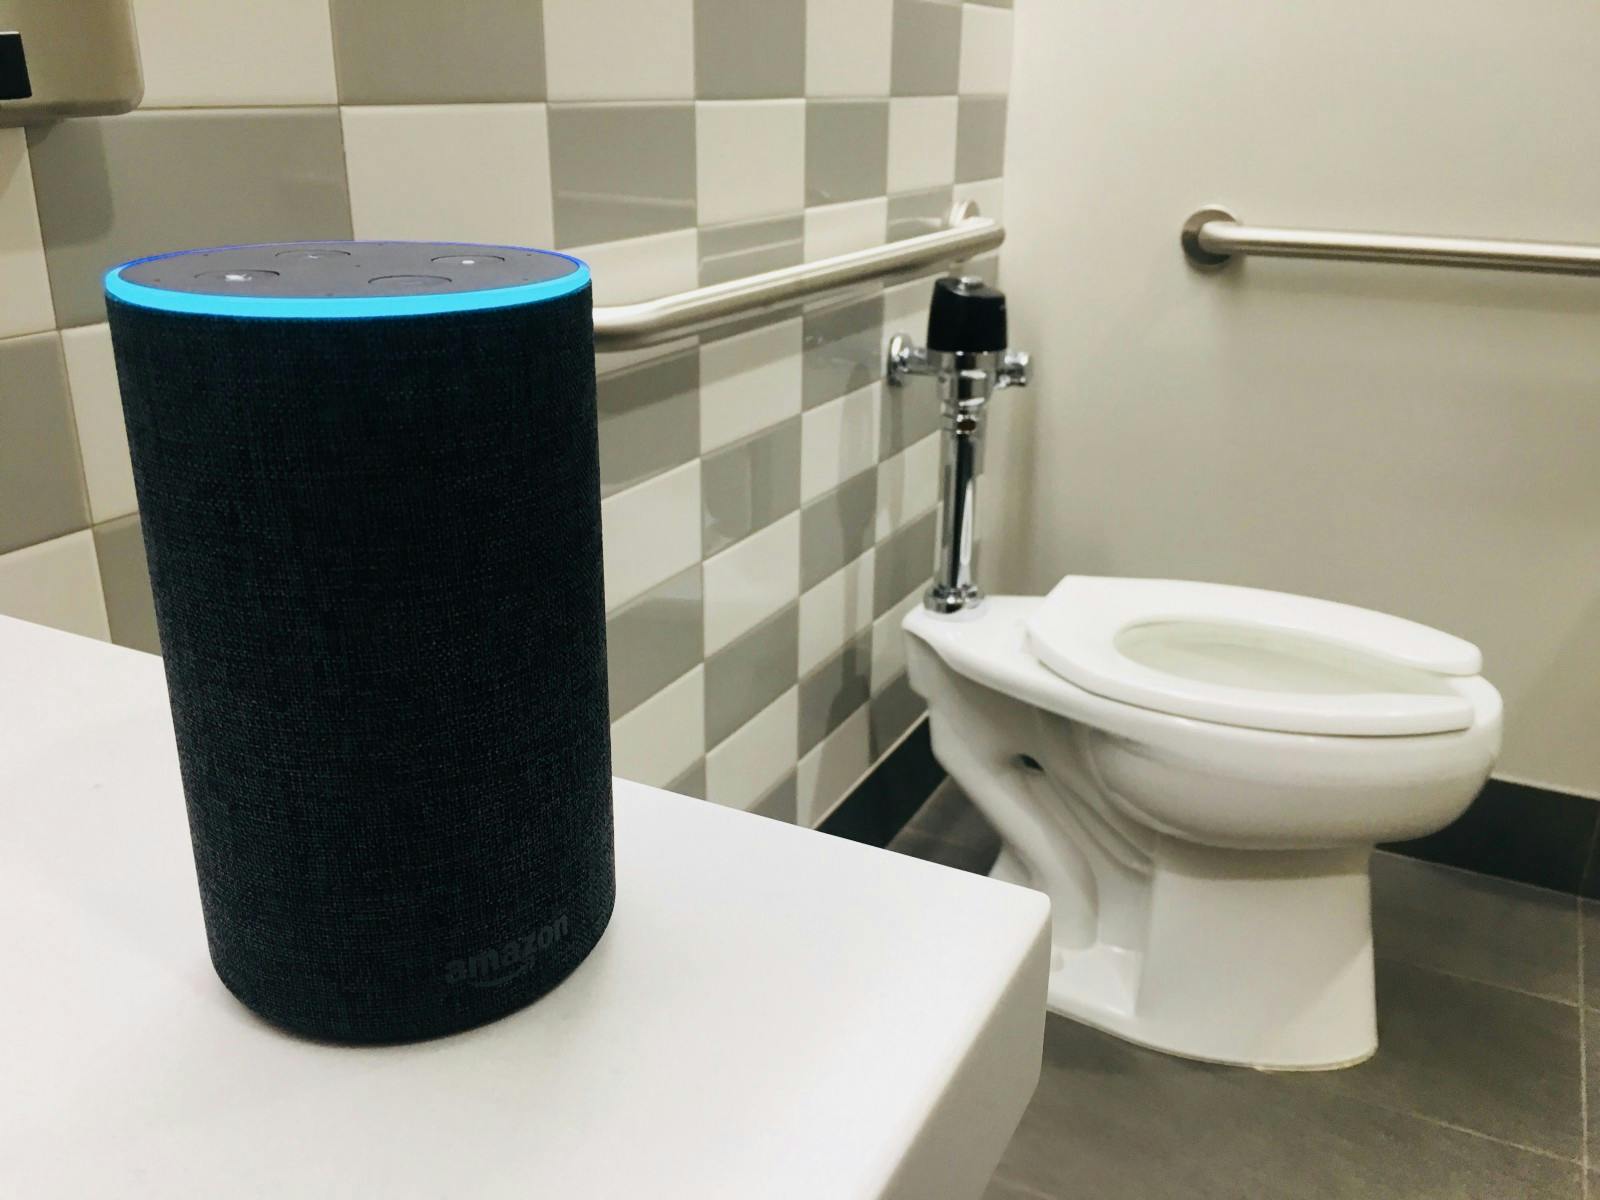 featured image - Amazon’s Next Cloud is in your Bathroom